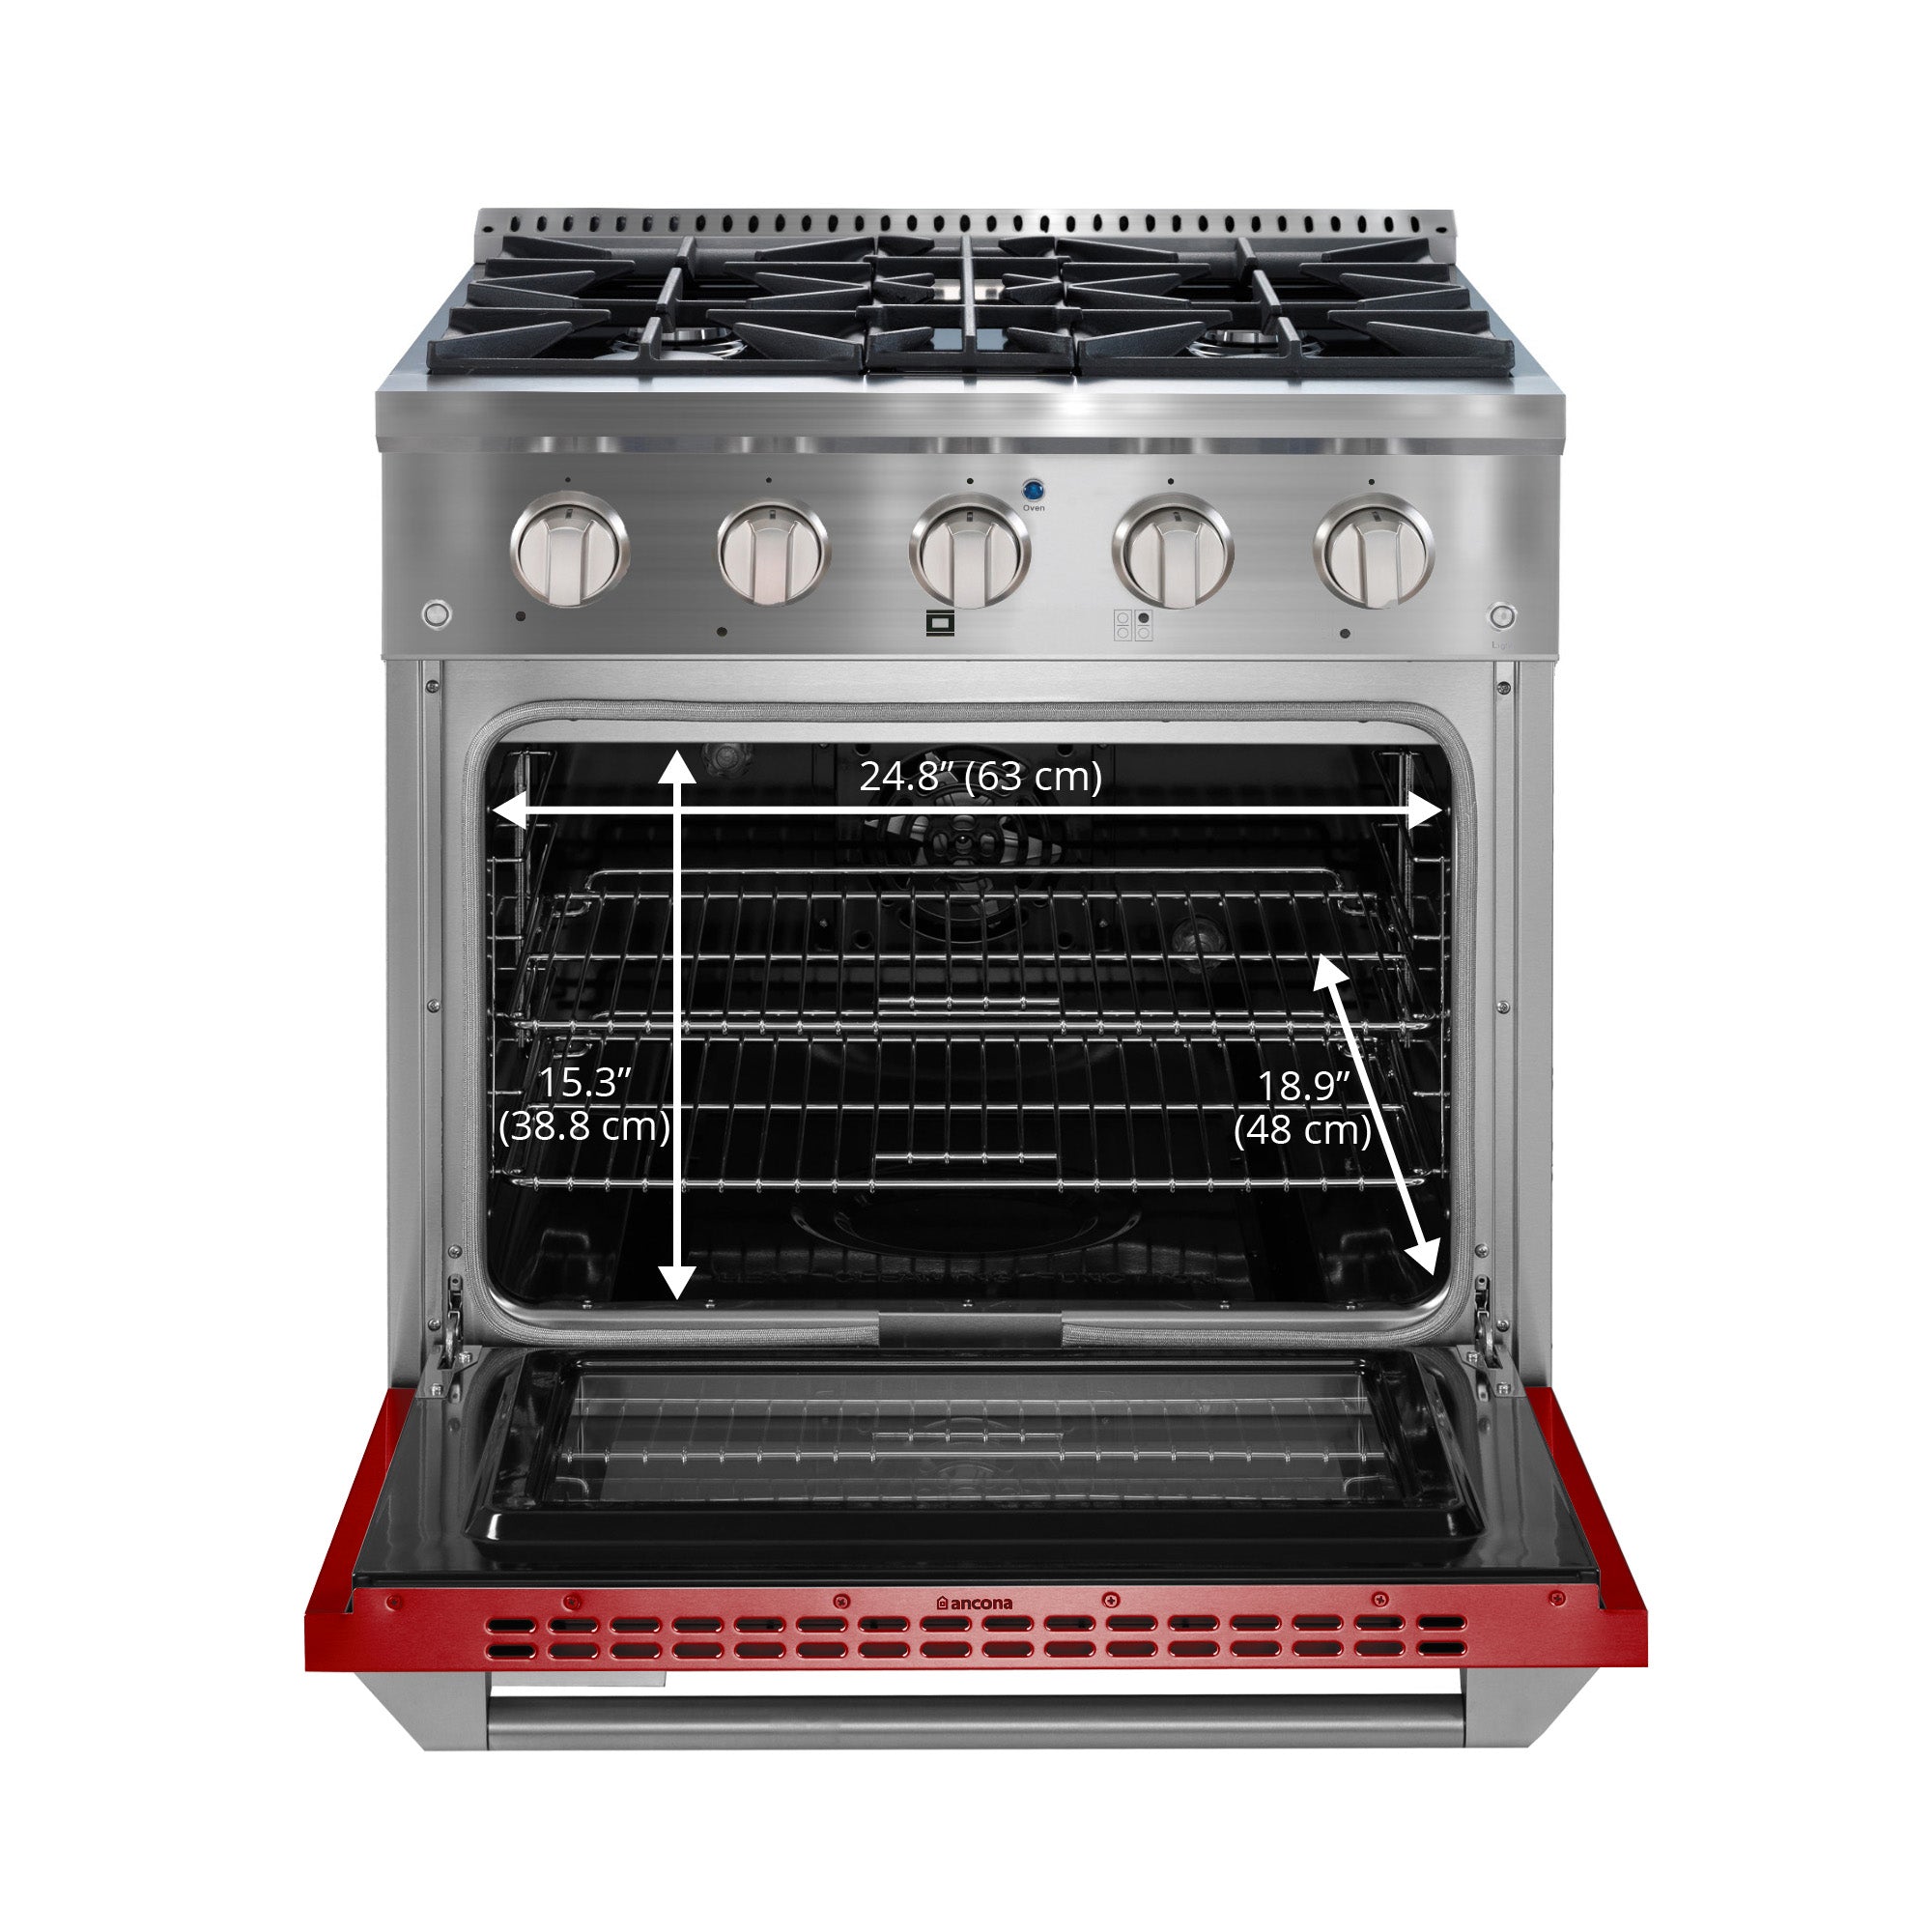 Ancona 30” 4.2 cu. ft. Dual Fuel Range with 4 Burners and Convection Oven in Stainless Steel with Red Door